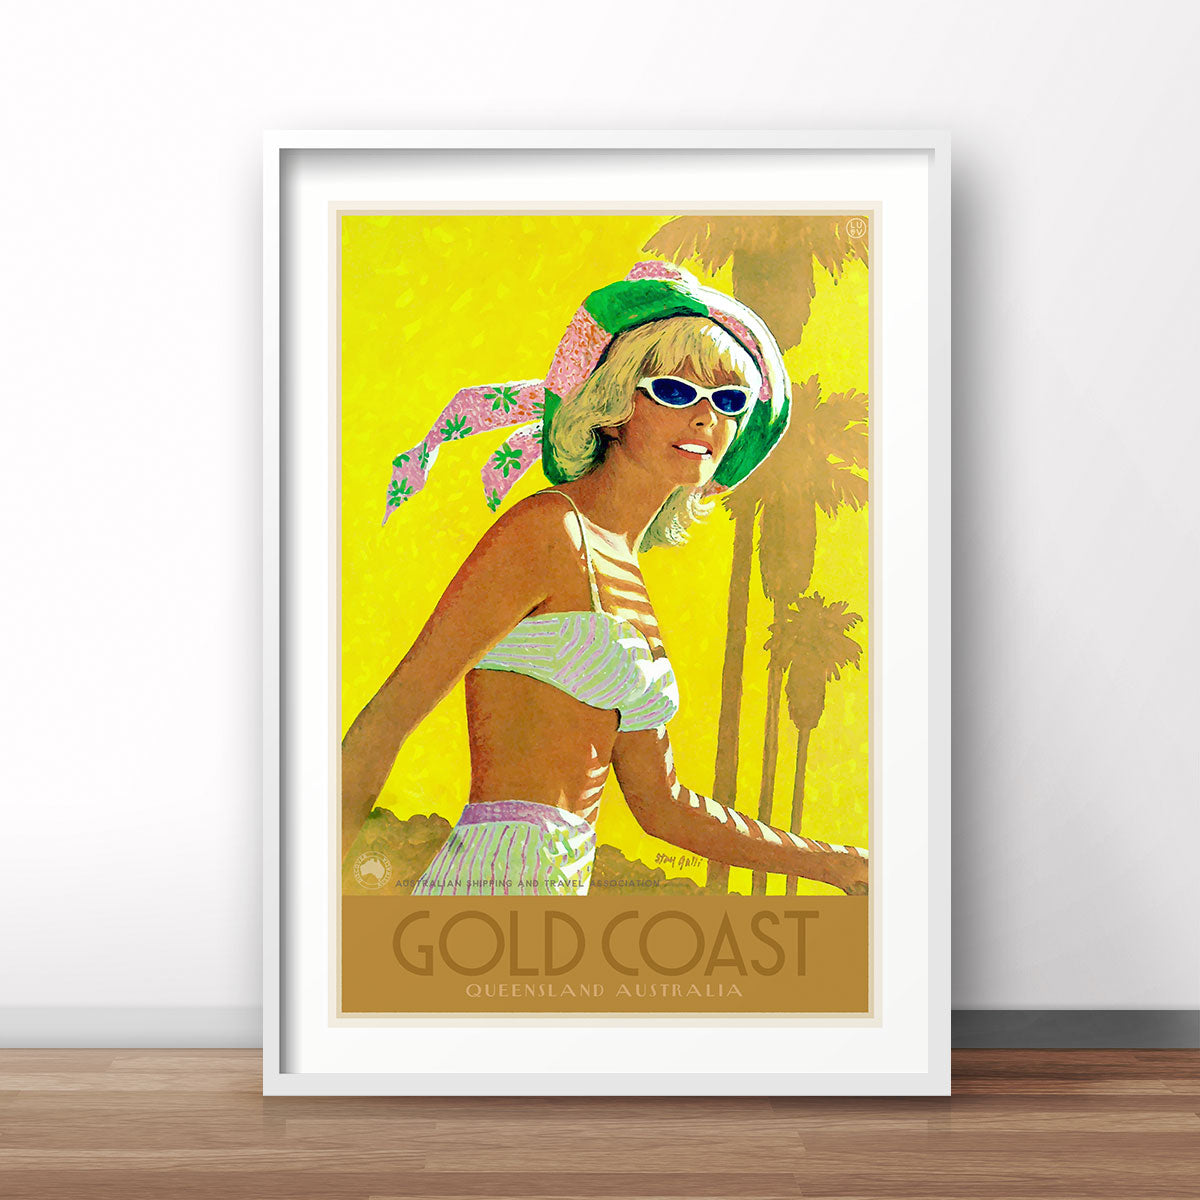 Gold Coast Queensland, retro vintage advertising poster print from Places We Luv